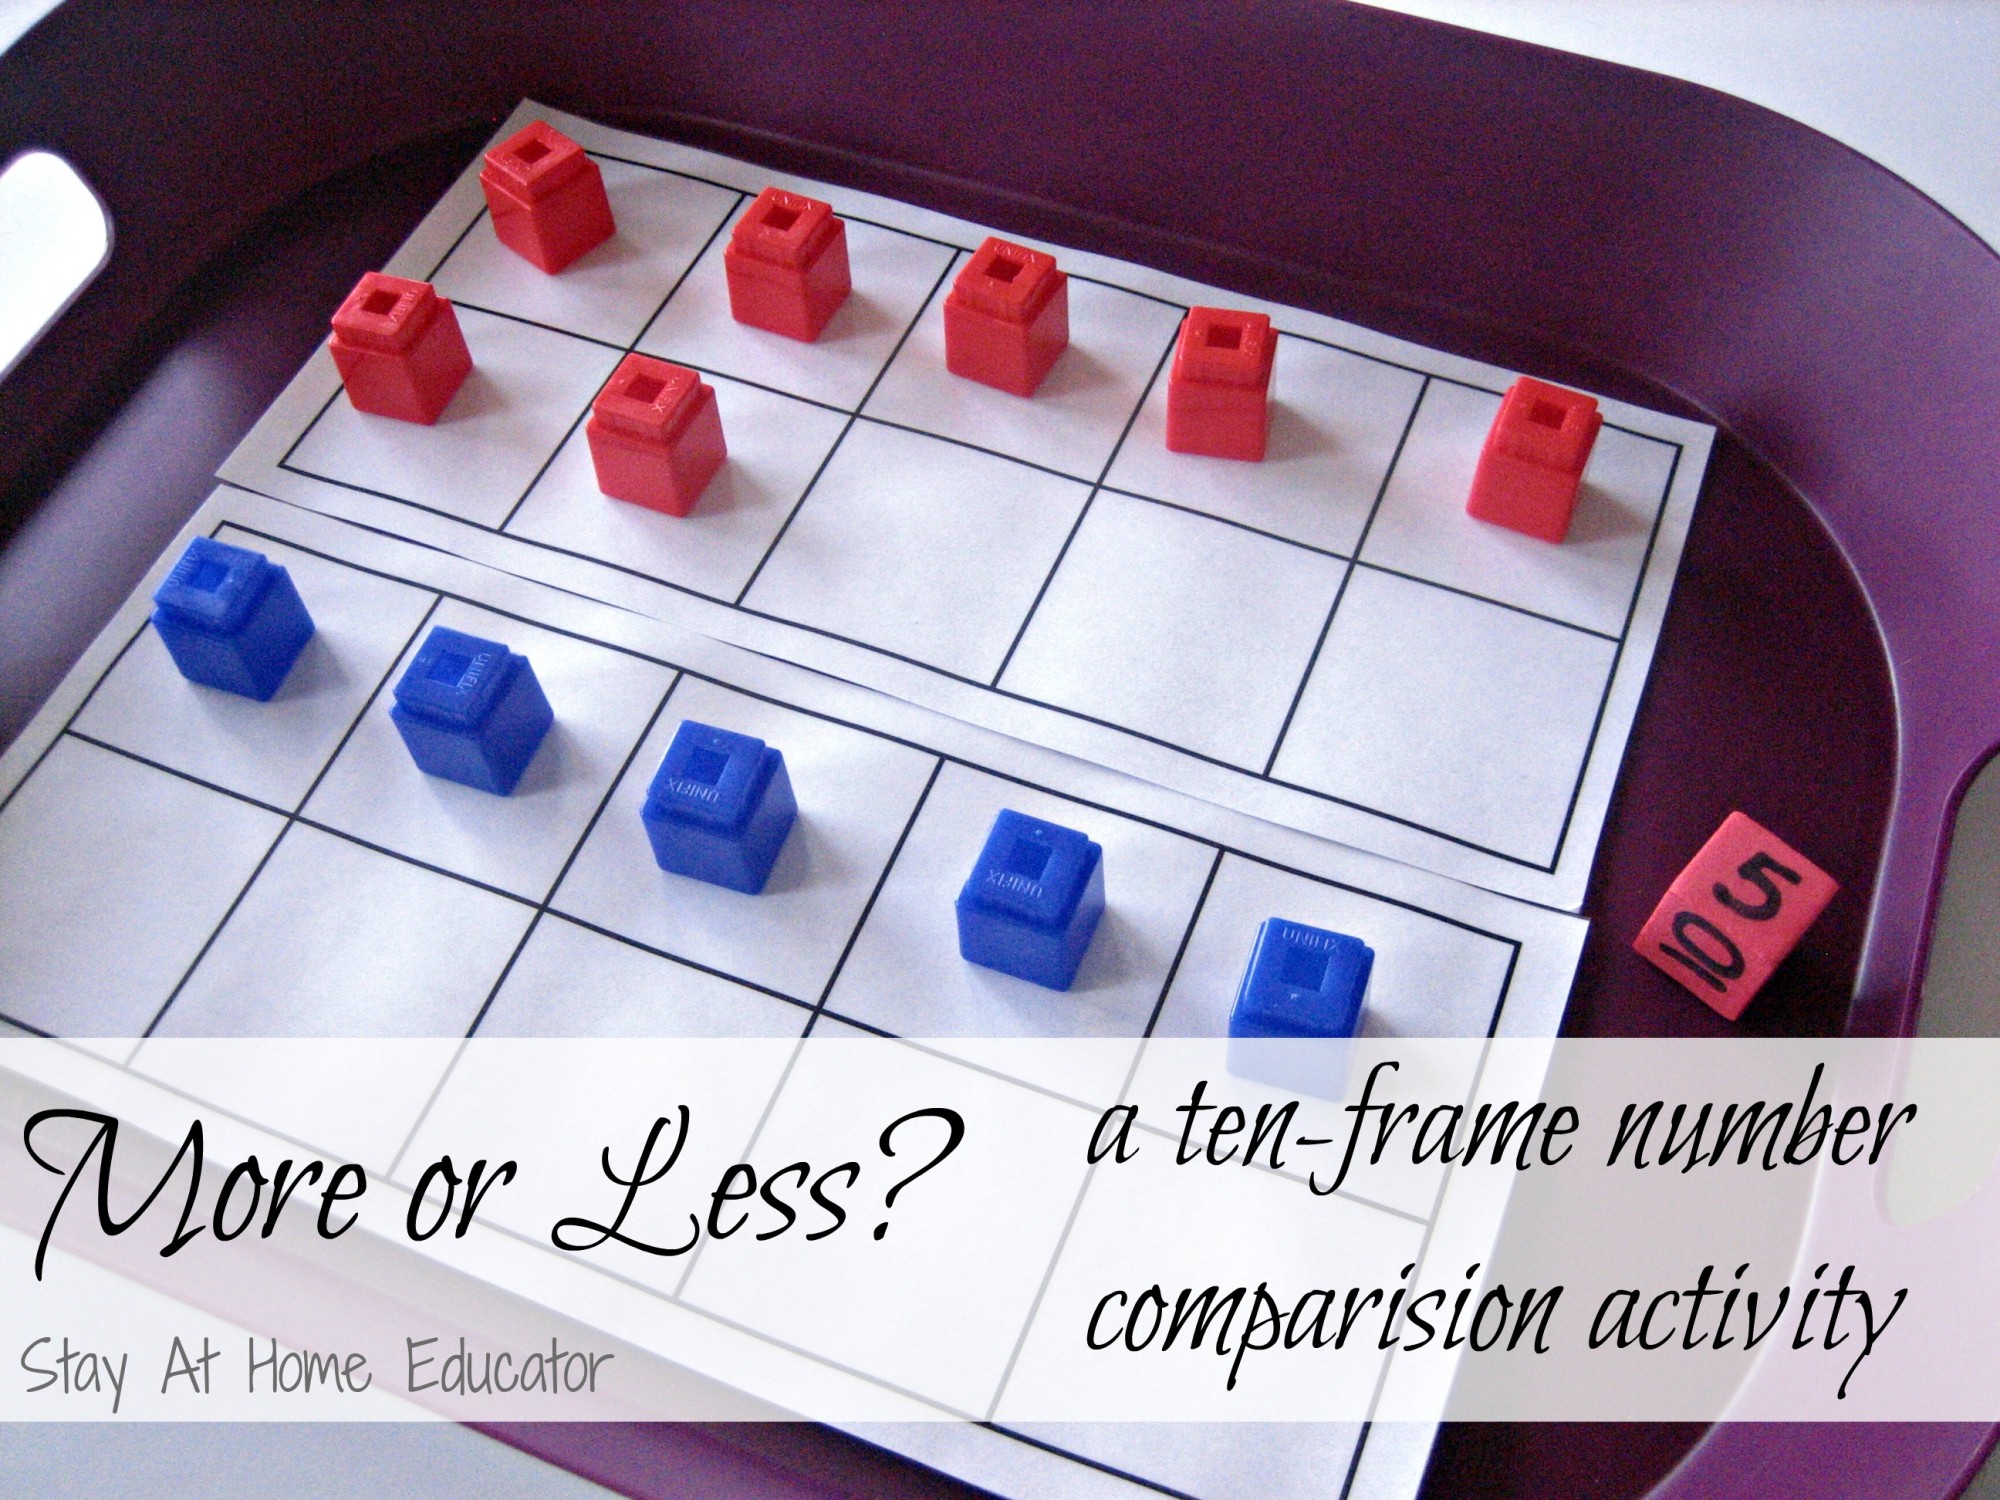 More or Less - a ten-frame number comparision activity for preschoolers through early elementary- Stay At Home Educator